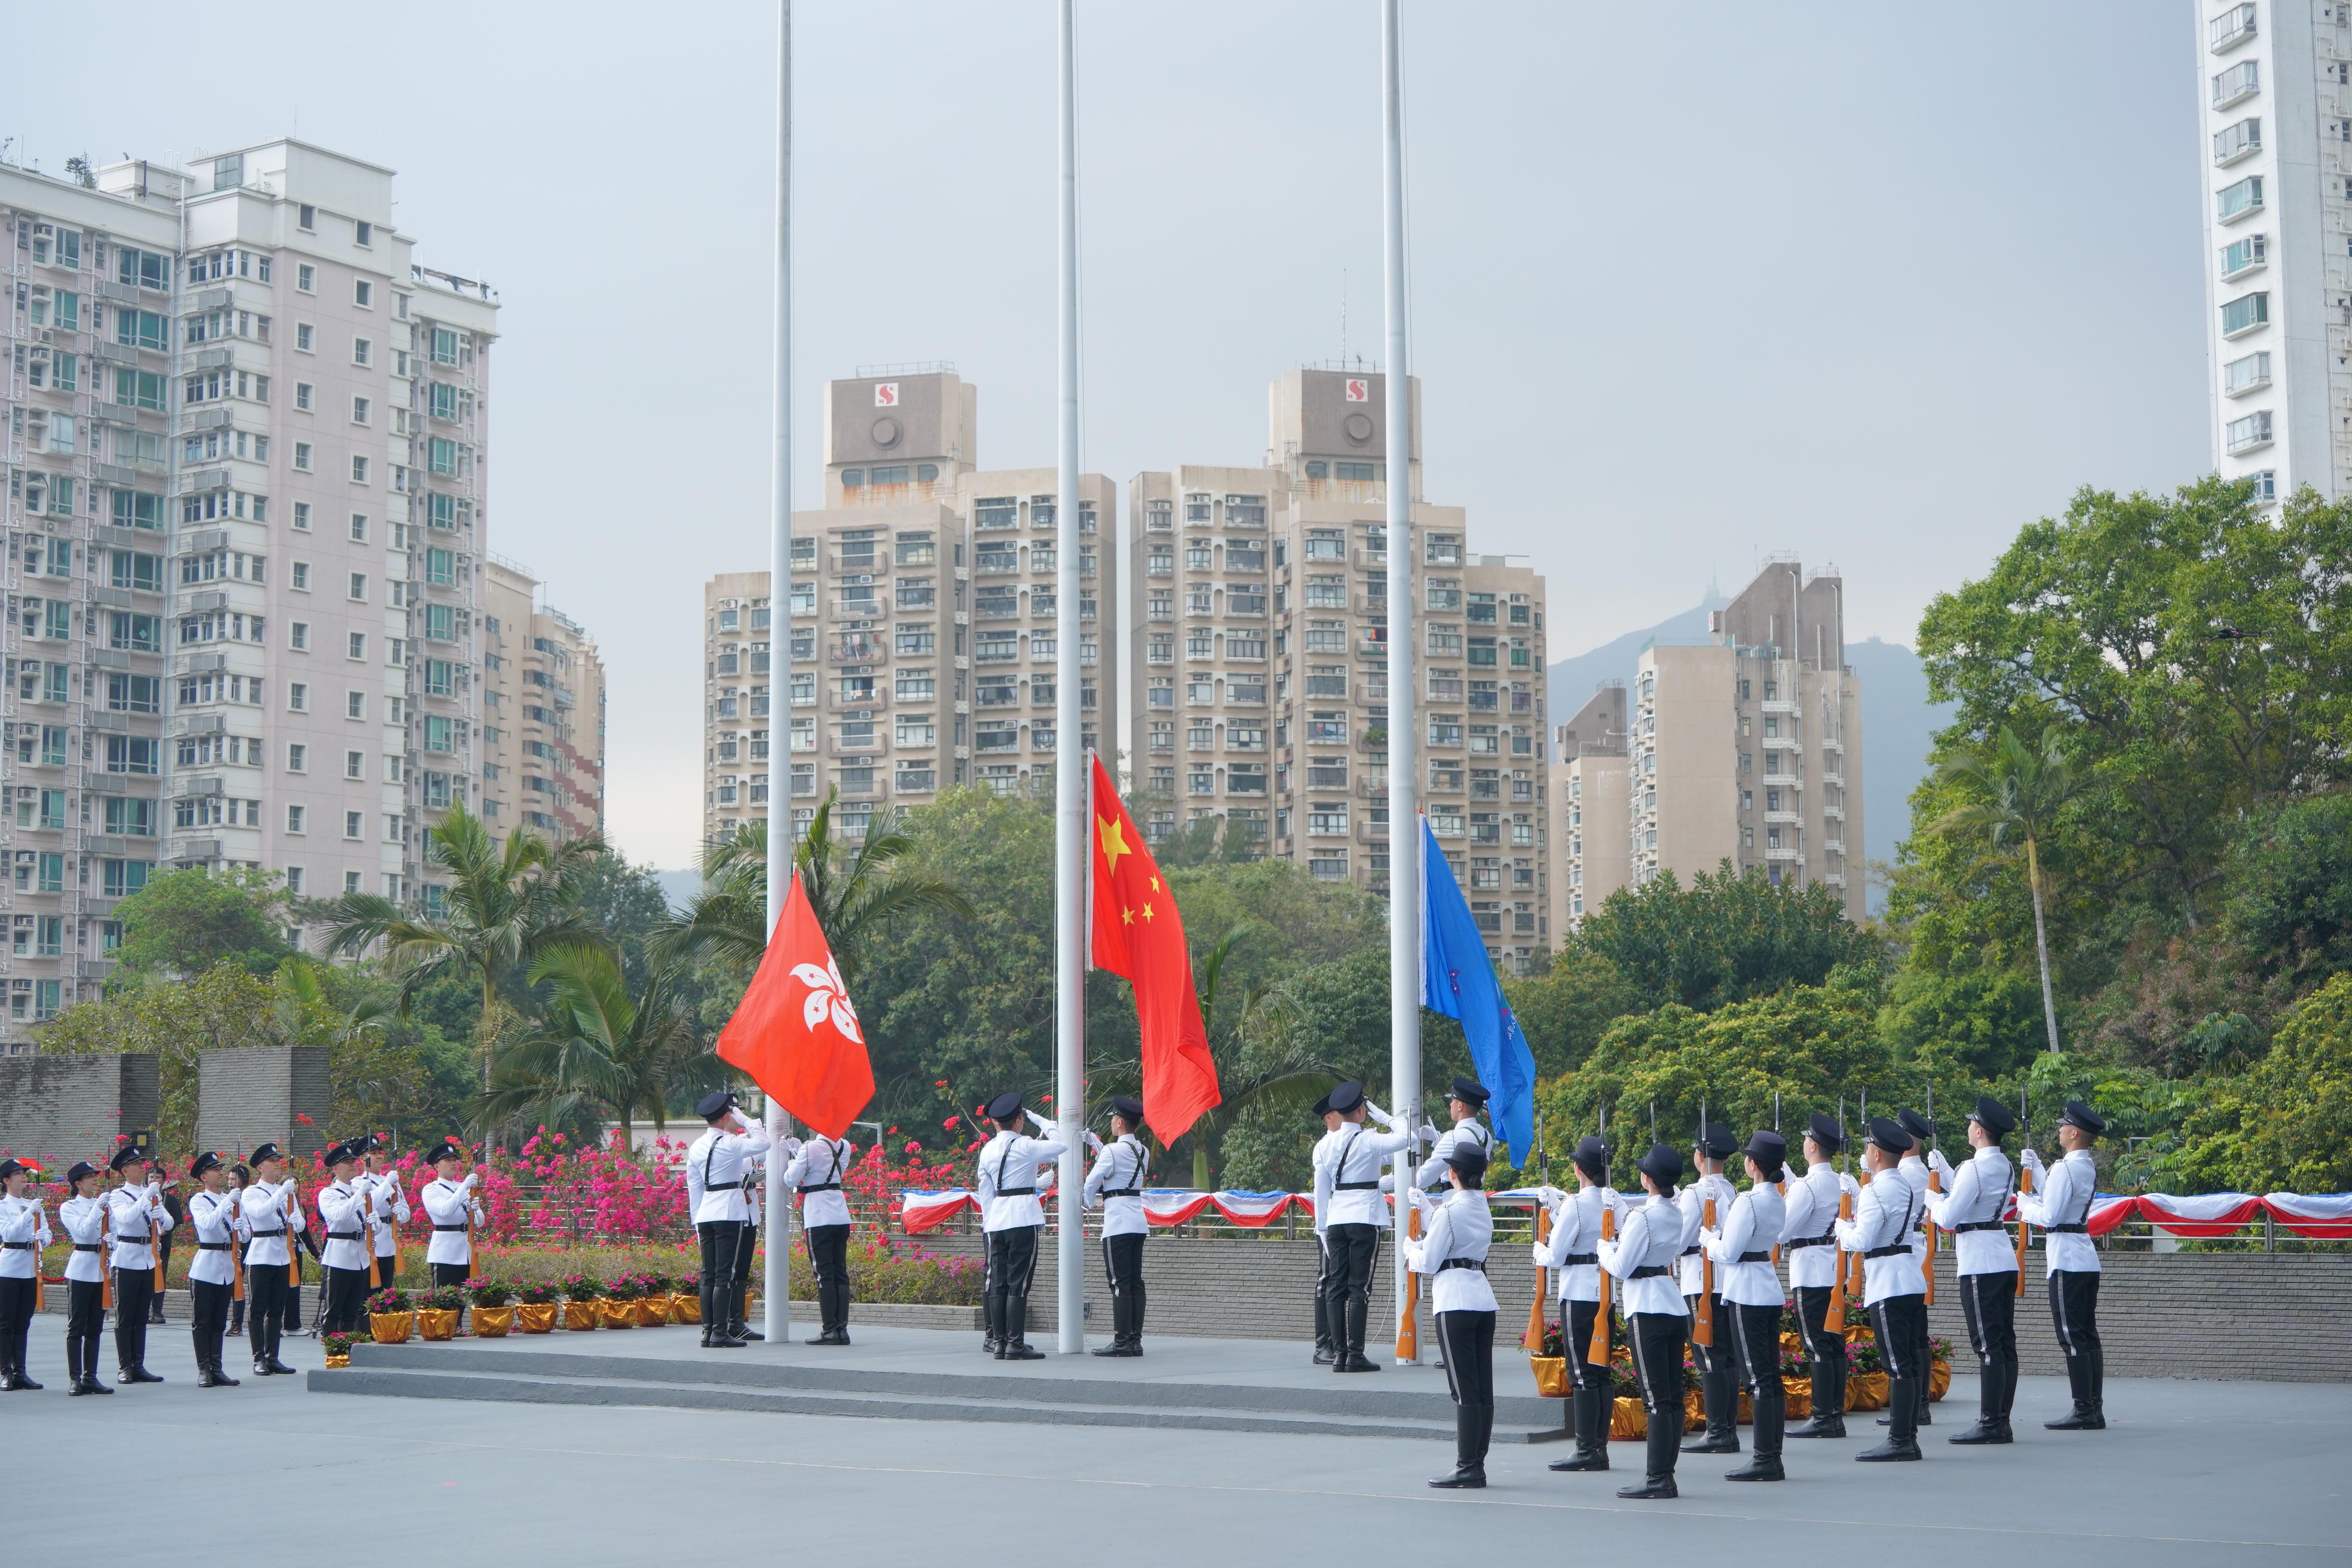 The Immigration Service Institute of Training and Development Passing-out Parade was held today (March 15). Photo shows the Flag Party conducting a flag-raising ceremony.